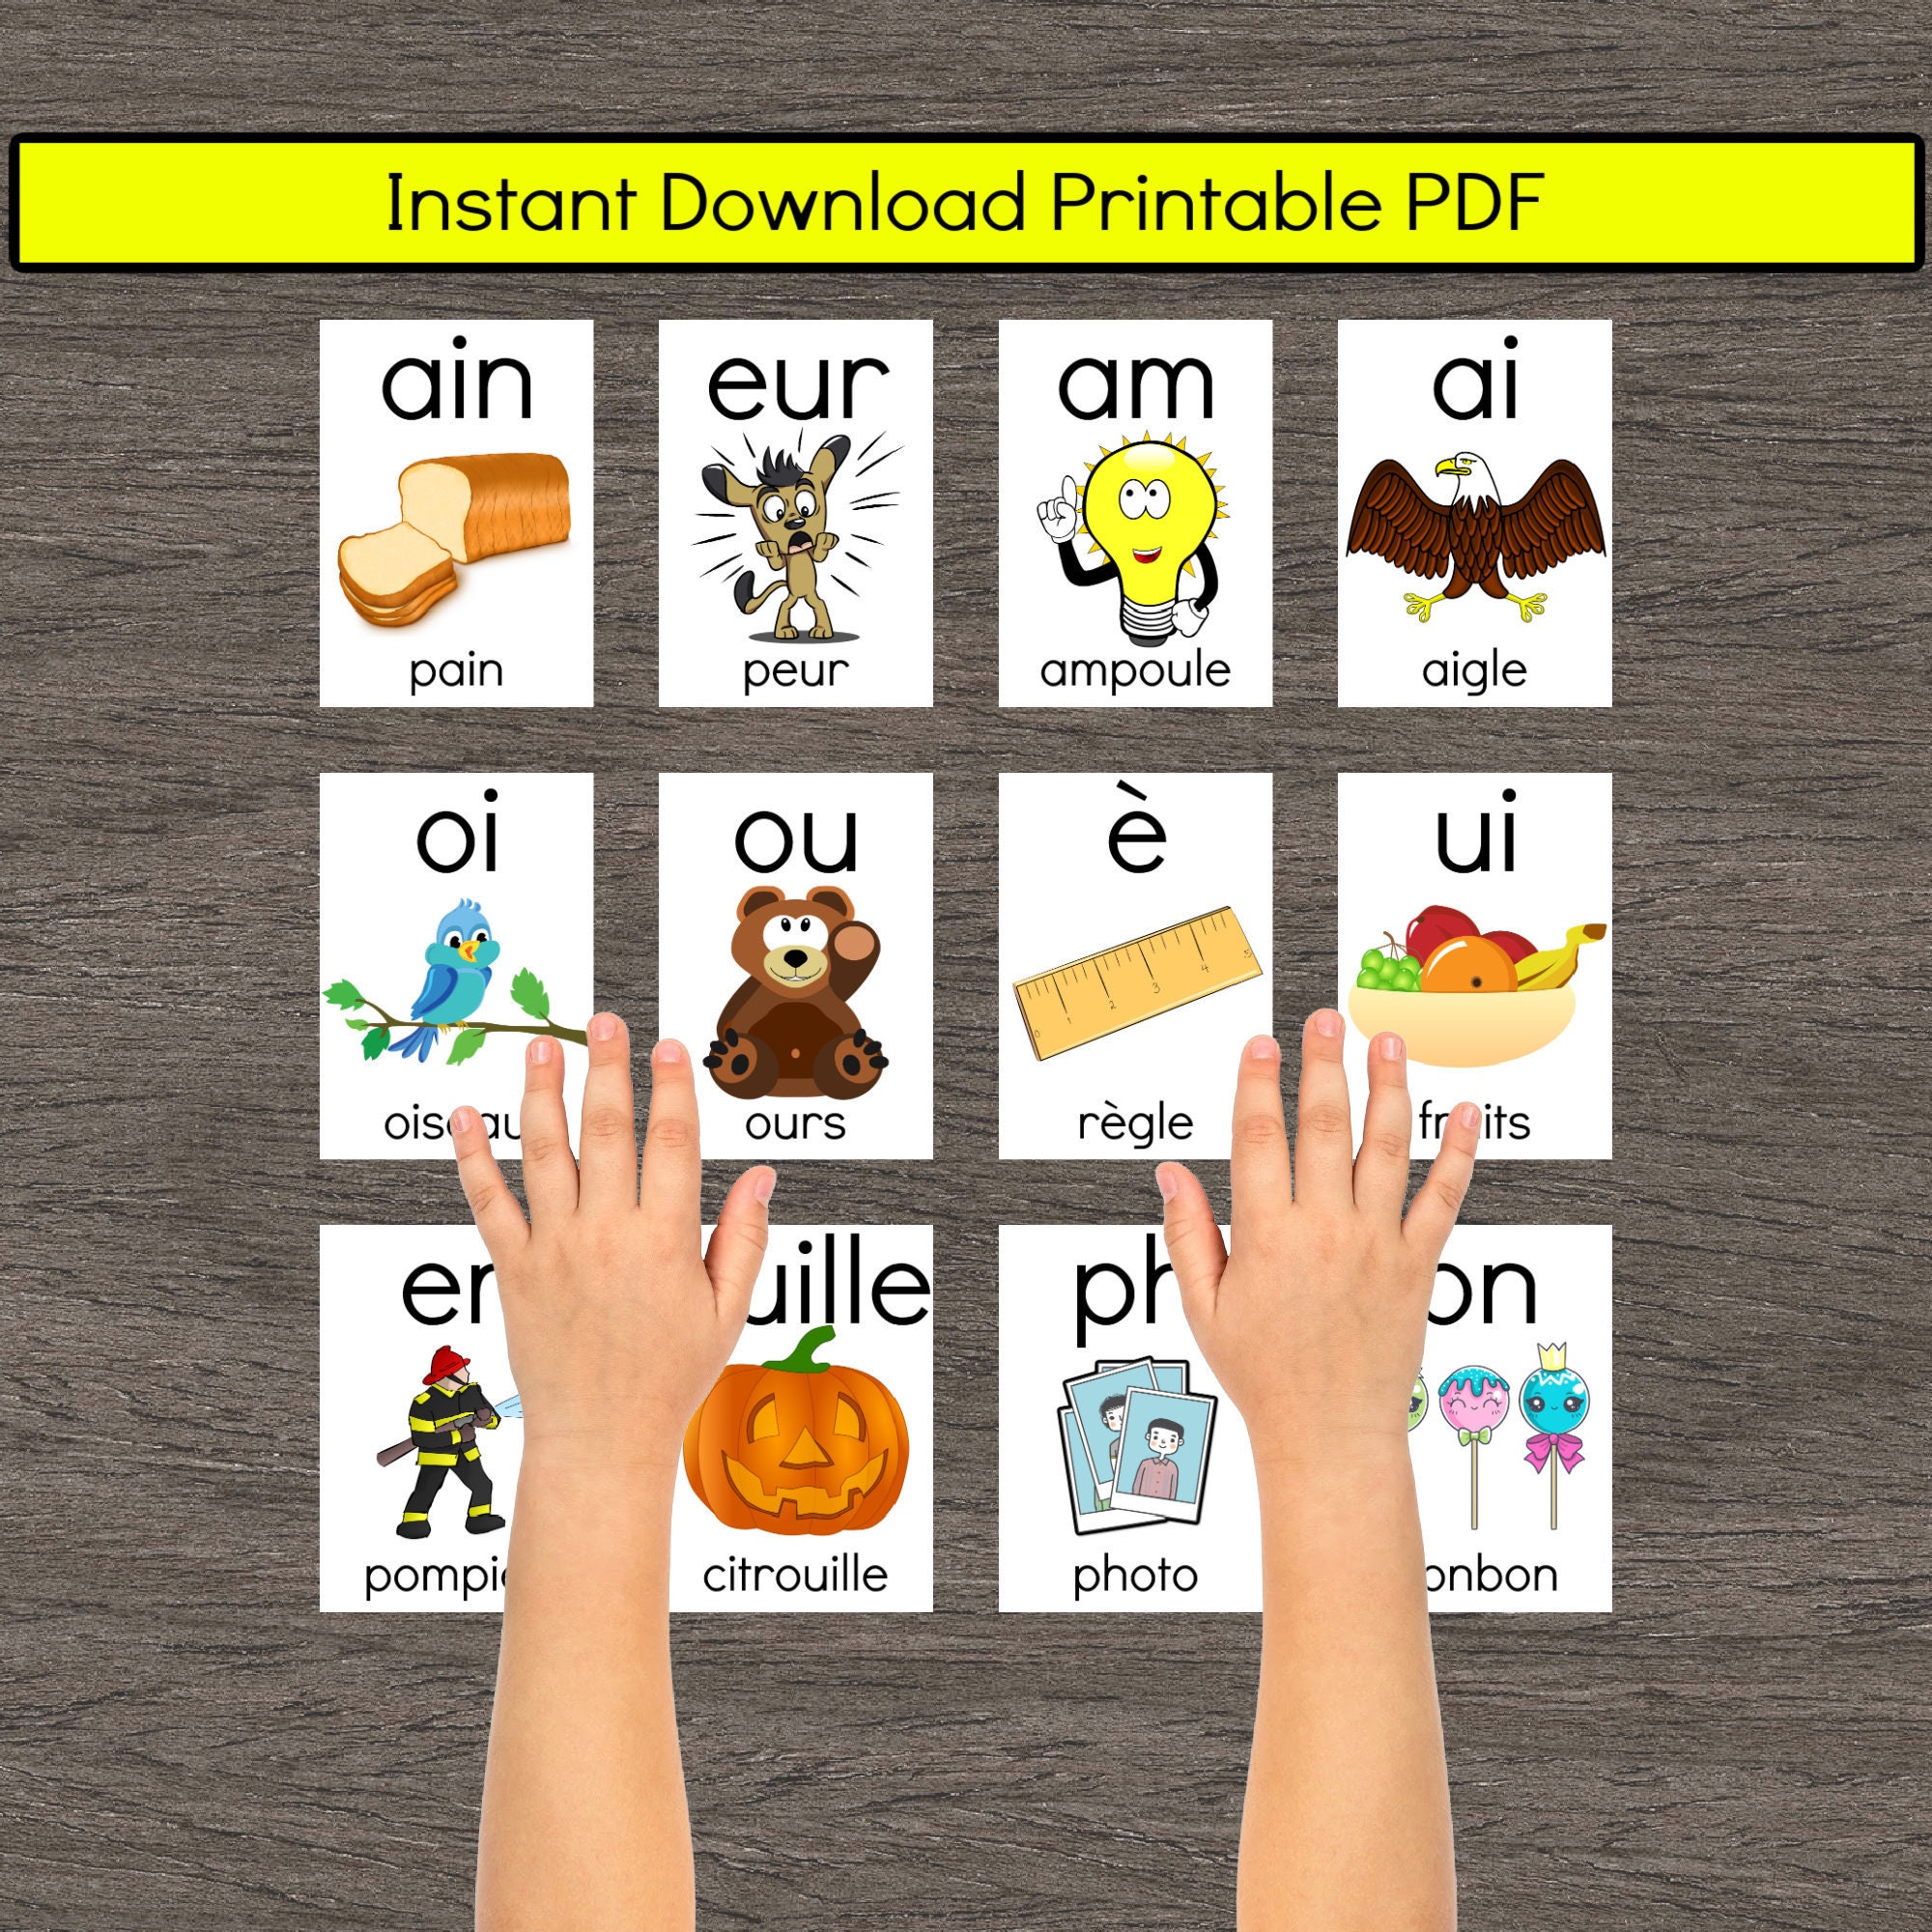 French Alphabet Sound Wall Cards | A-Z | Phonics | Structured Literacy